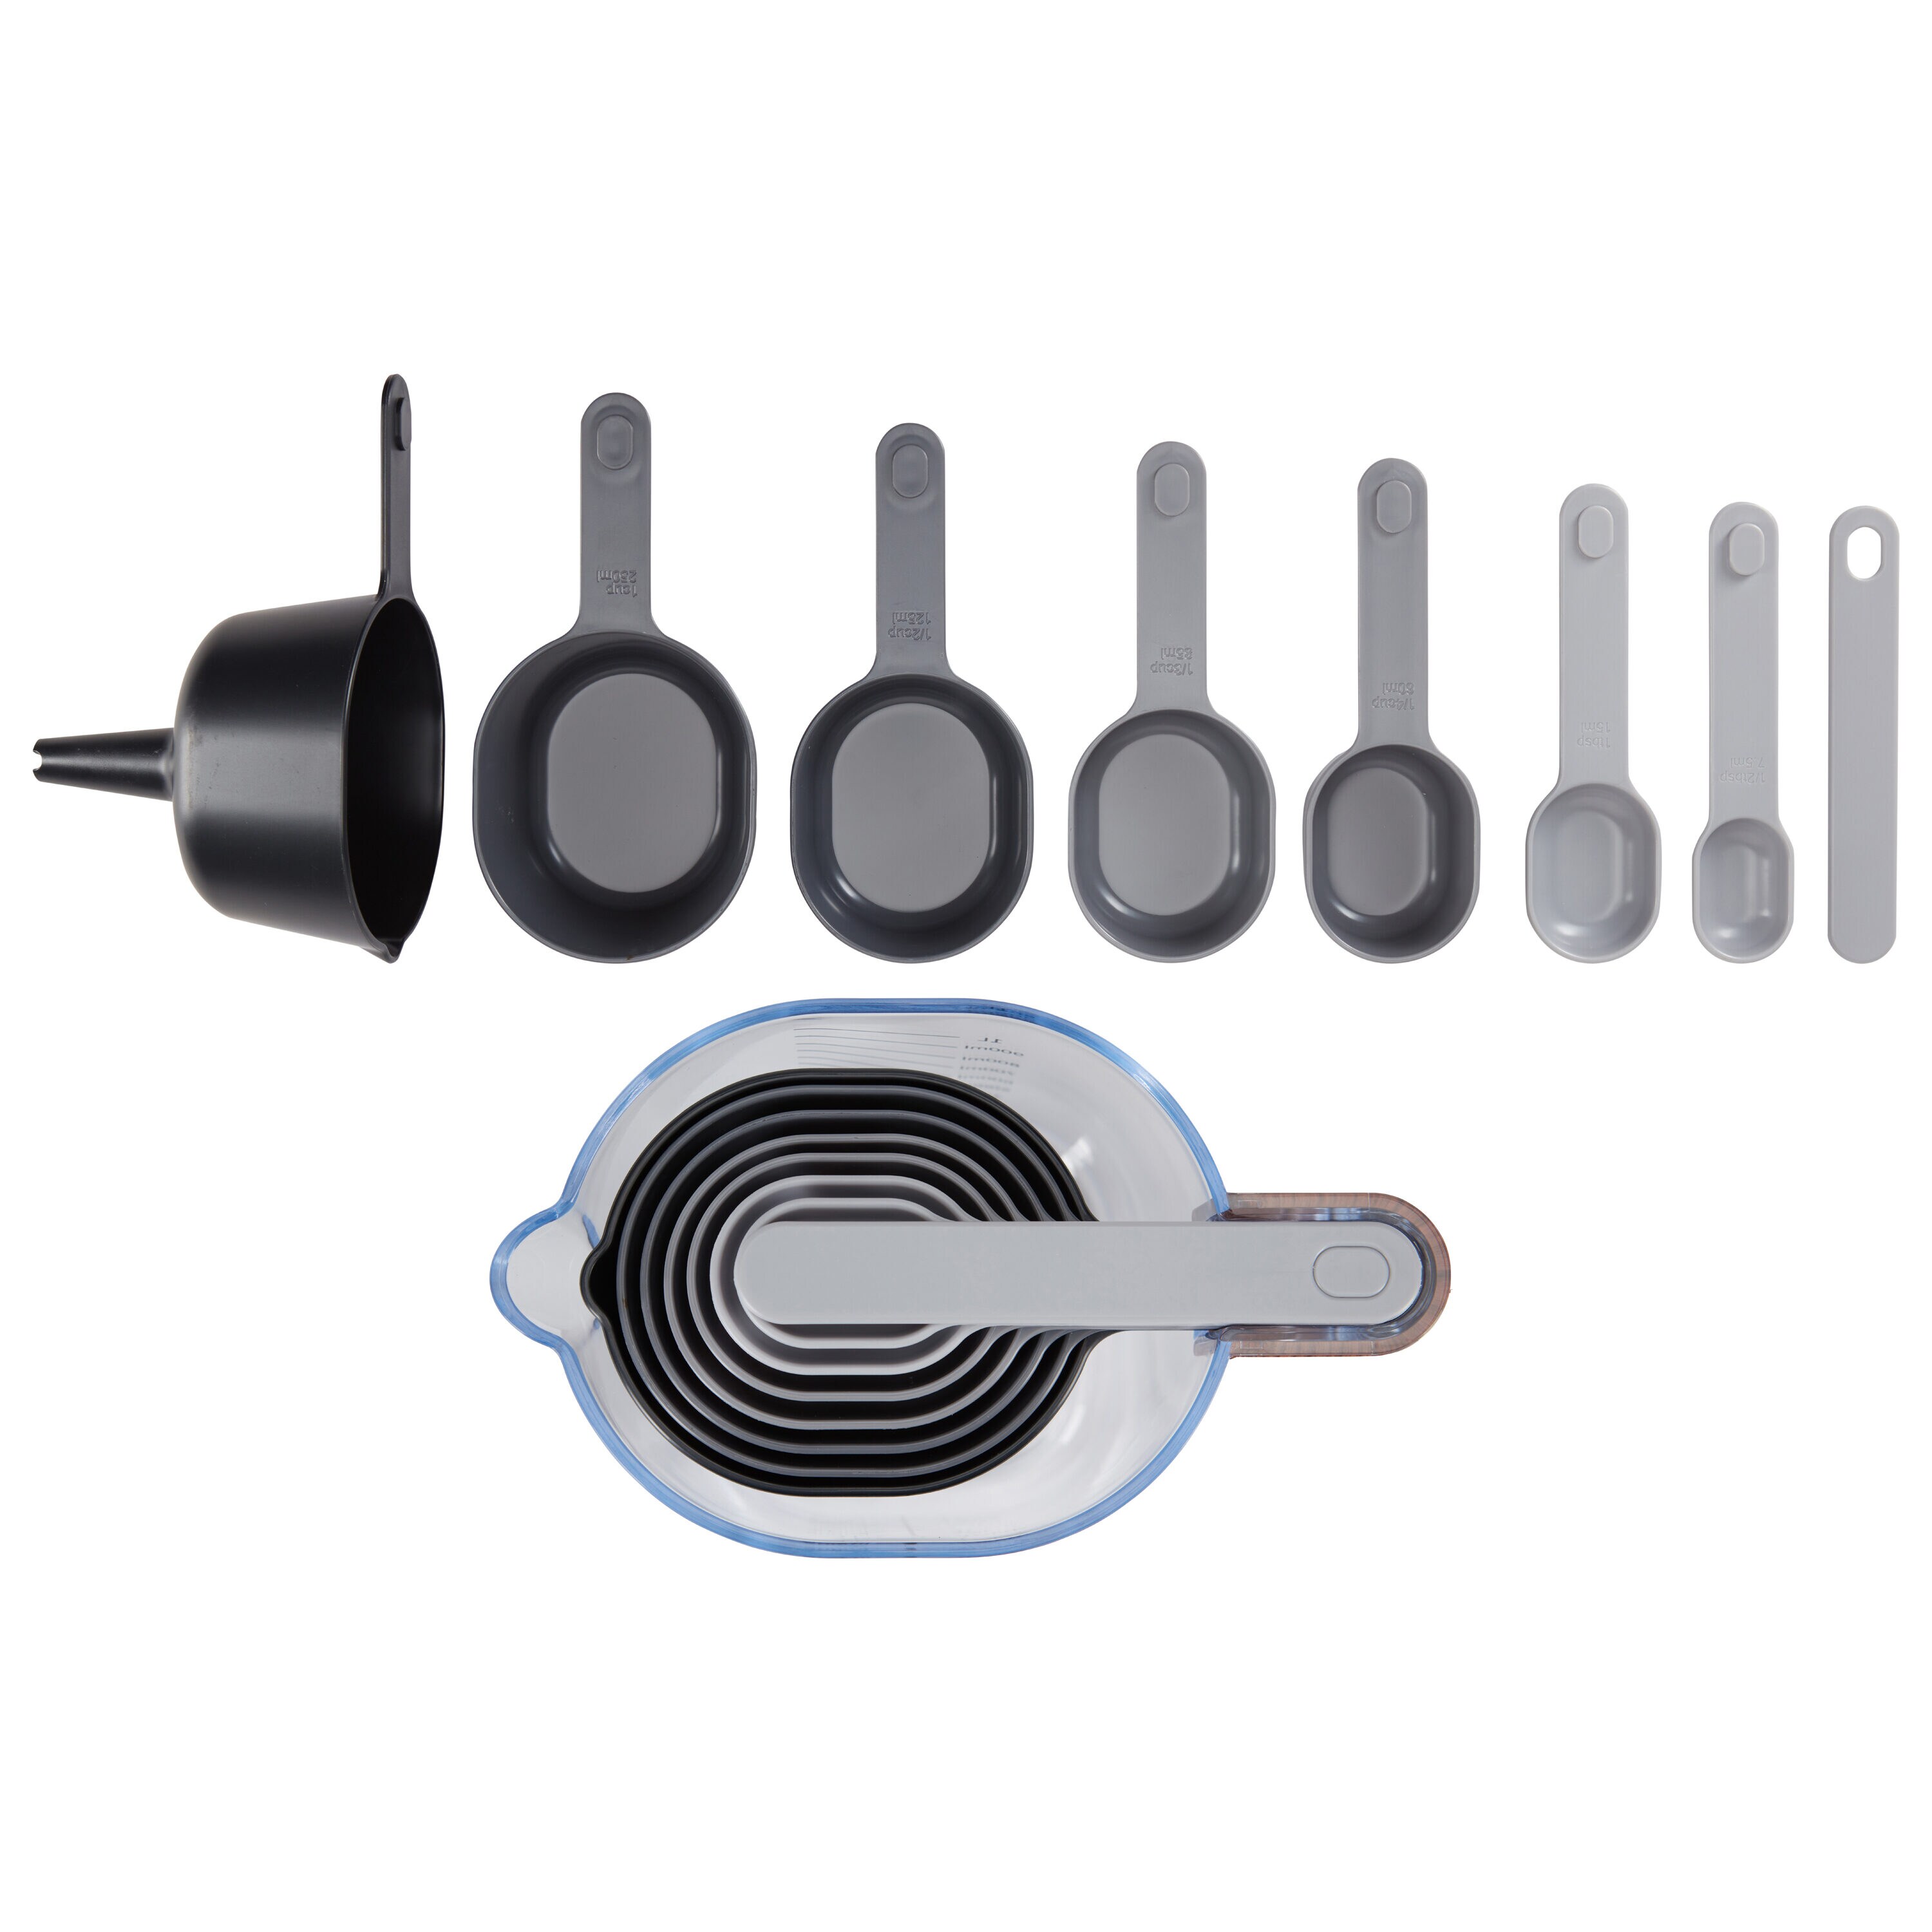 Phantom Chef Navy Cooking Pot Accessory Set, Can Opener, Whisk, Peeler,  Pizza Cutter, Garlic Press, Stainless Steel